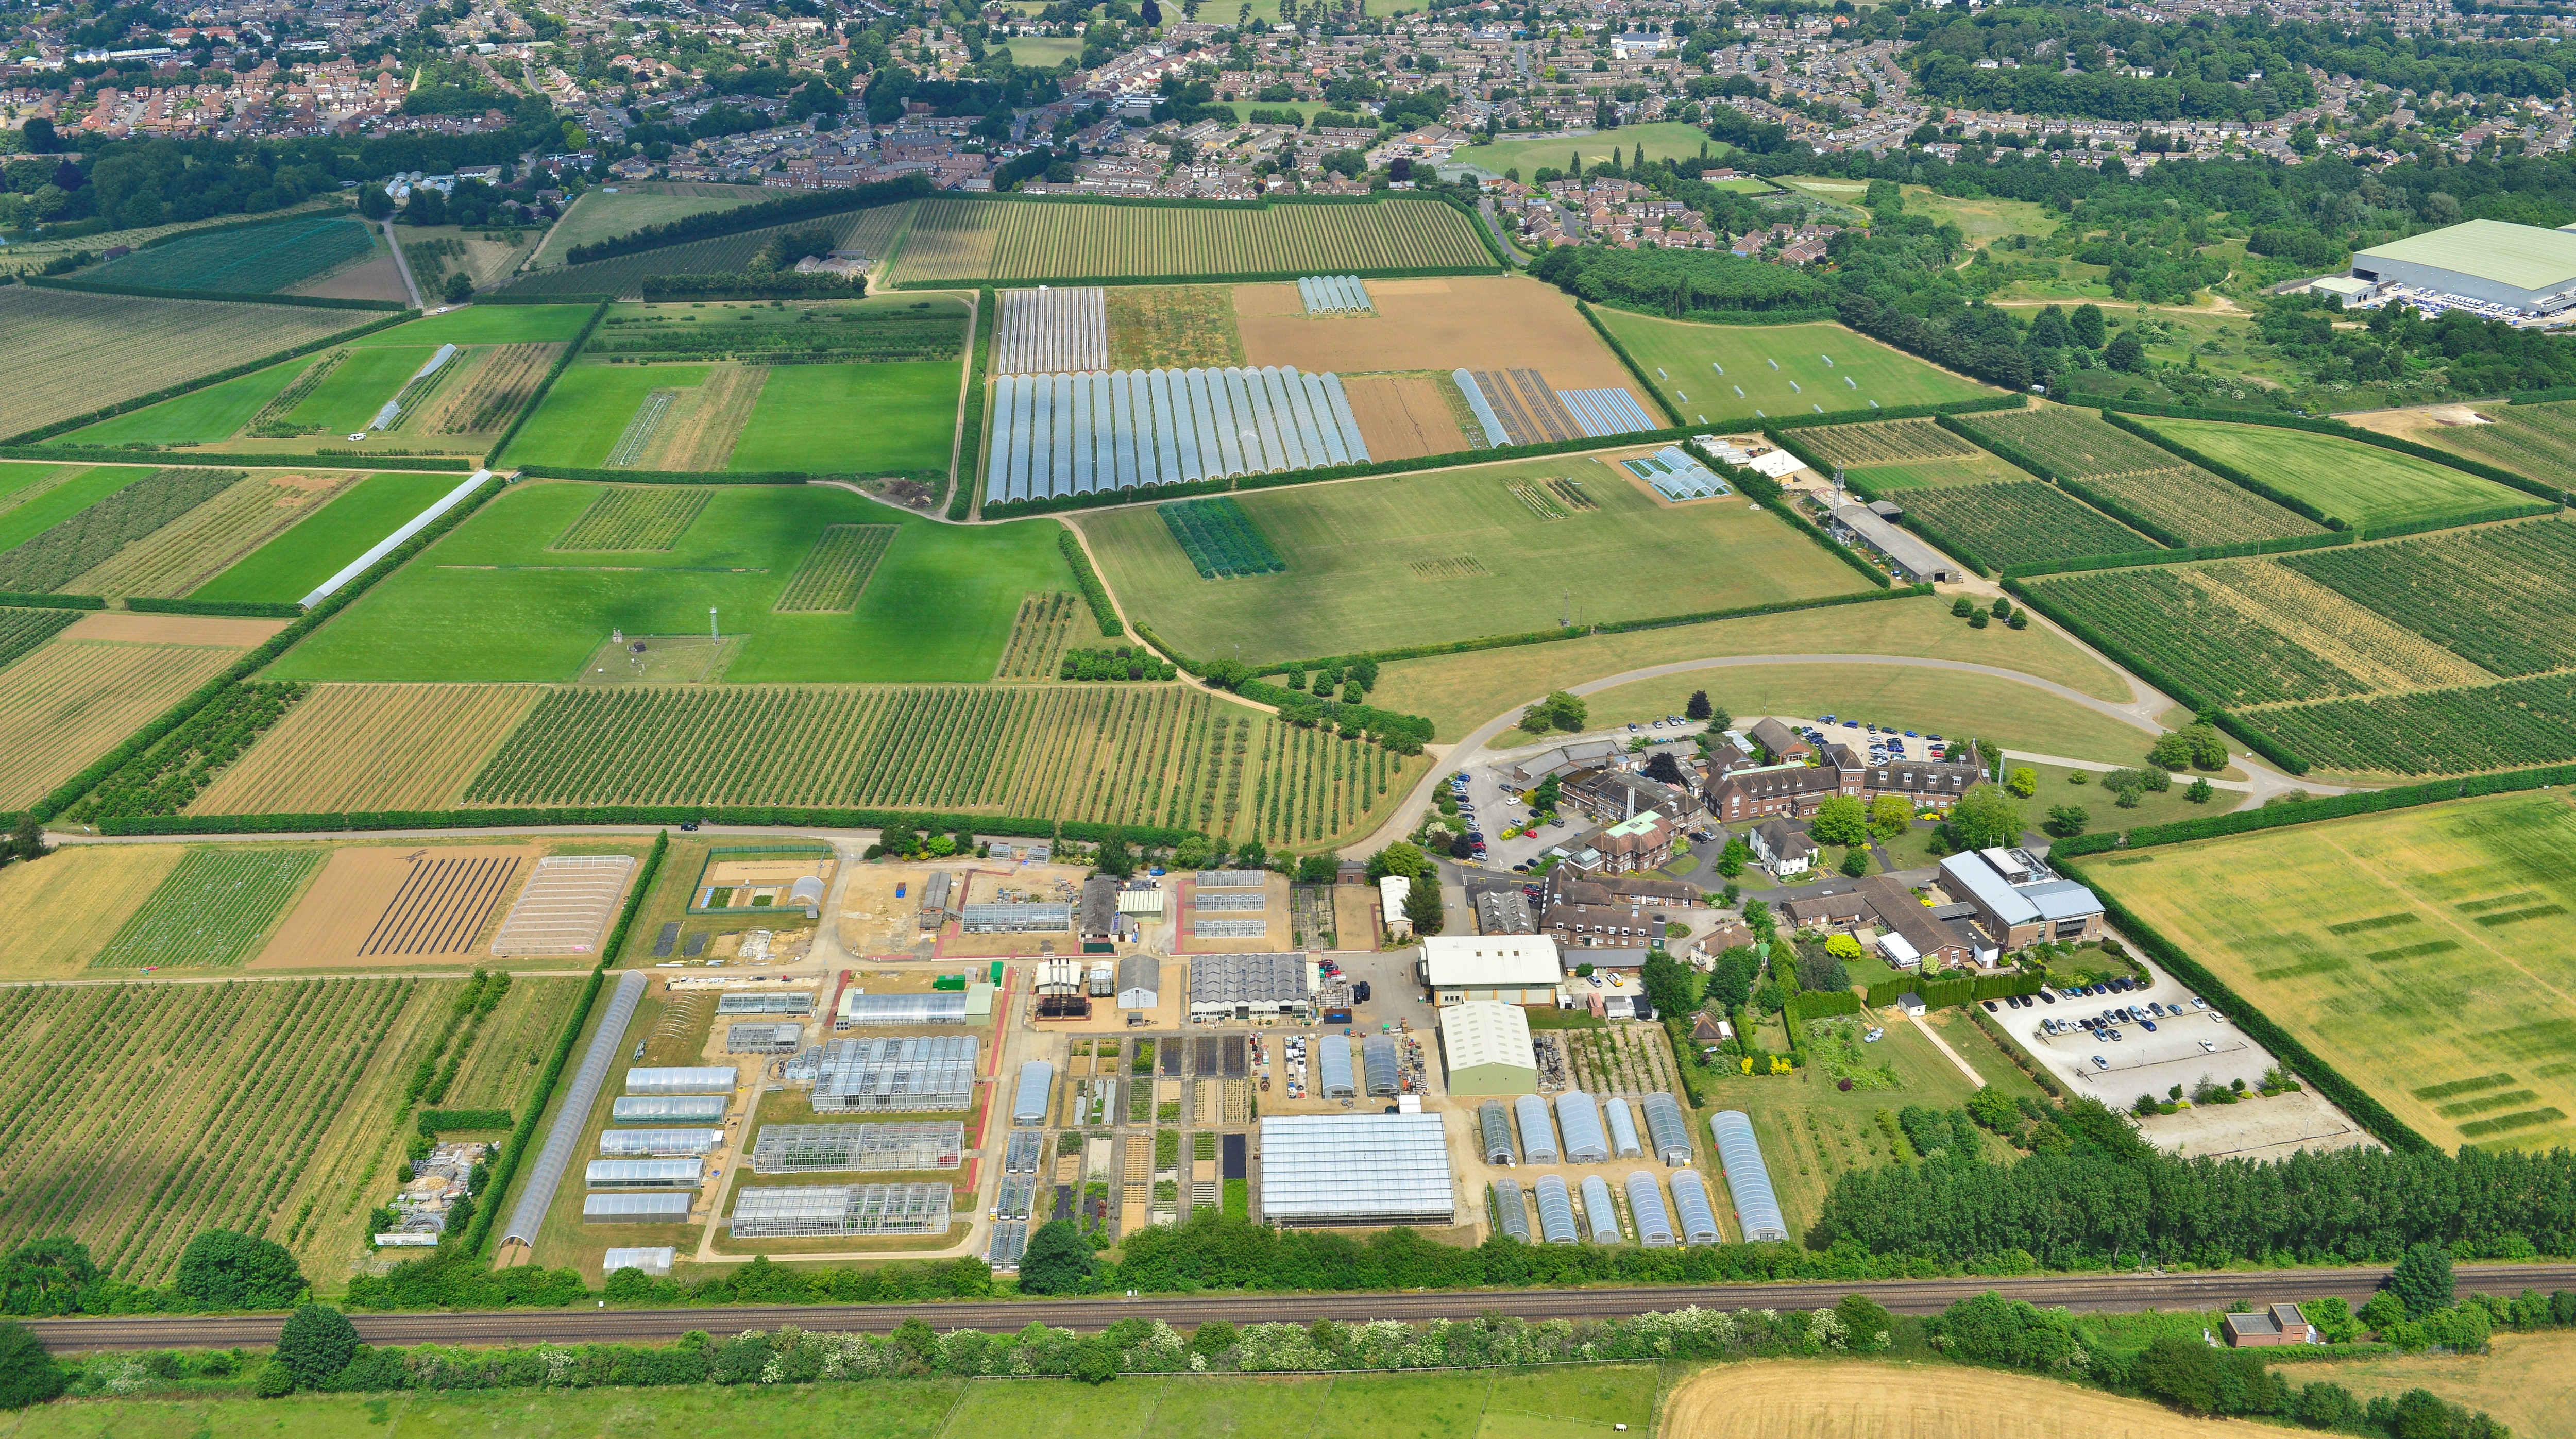 East Malling Research Campus